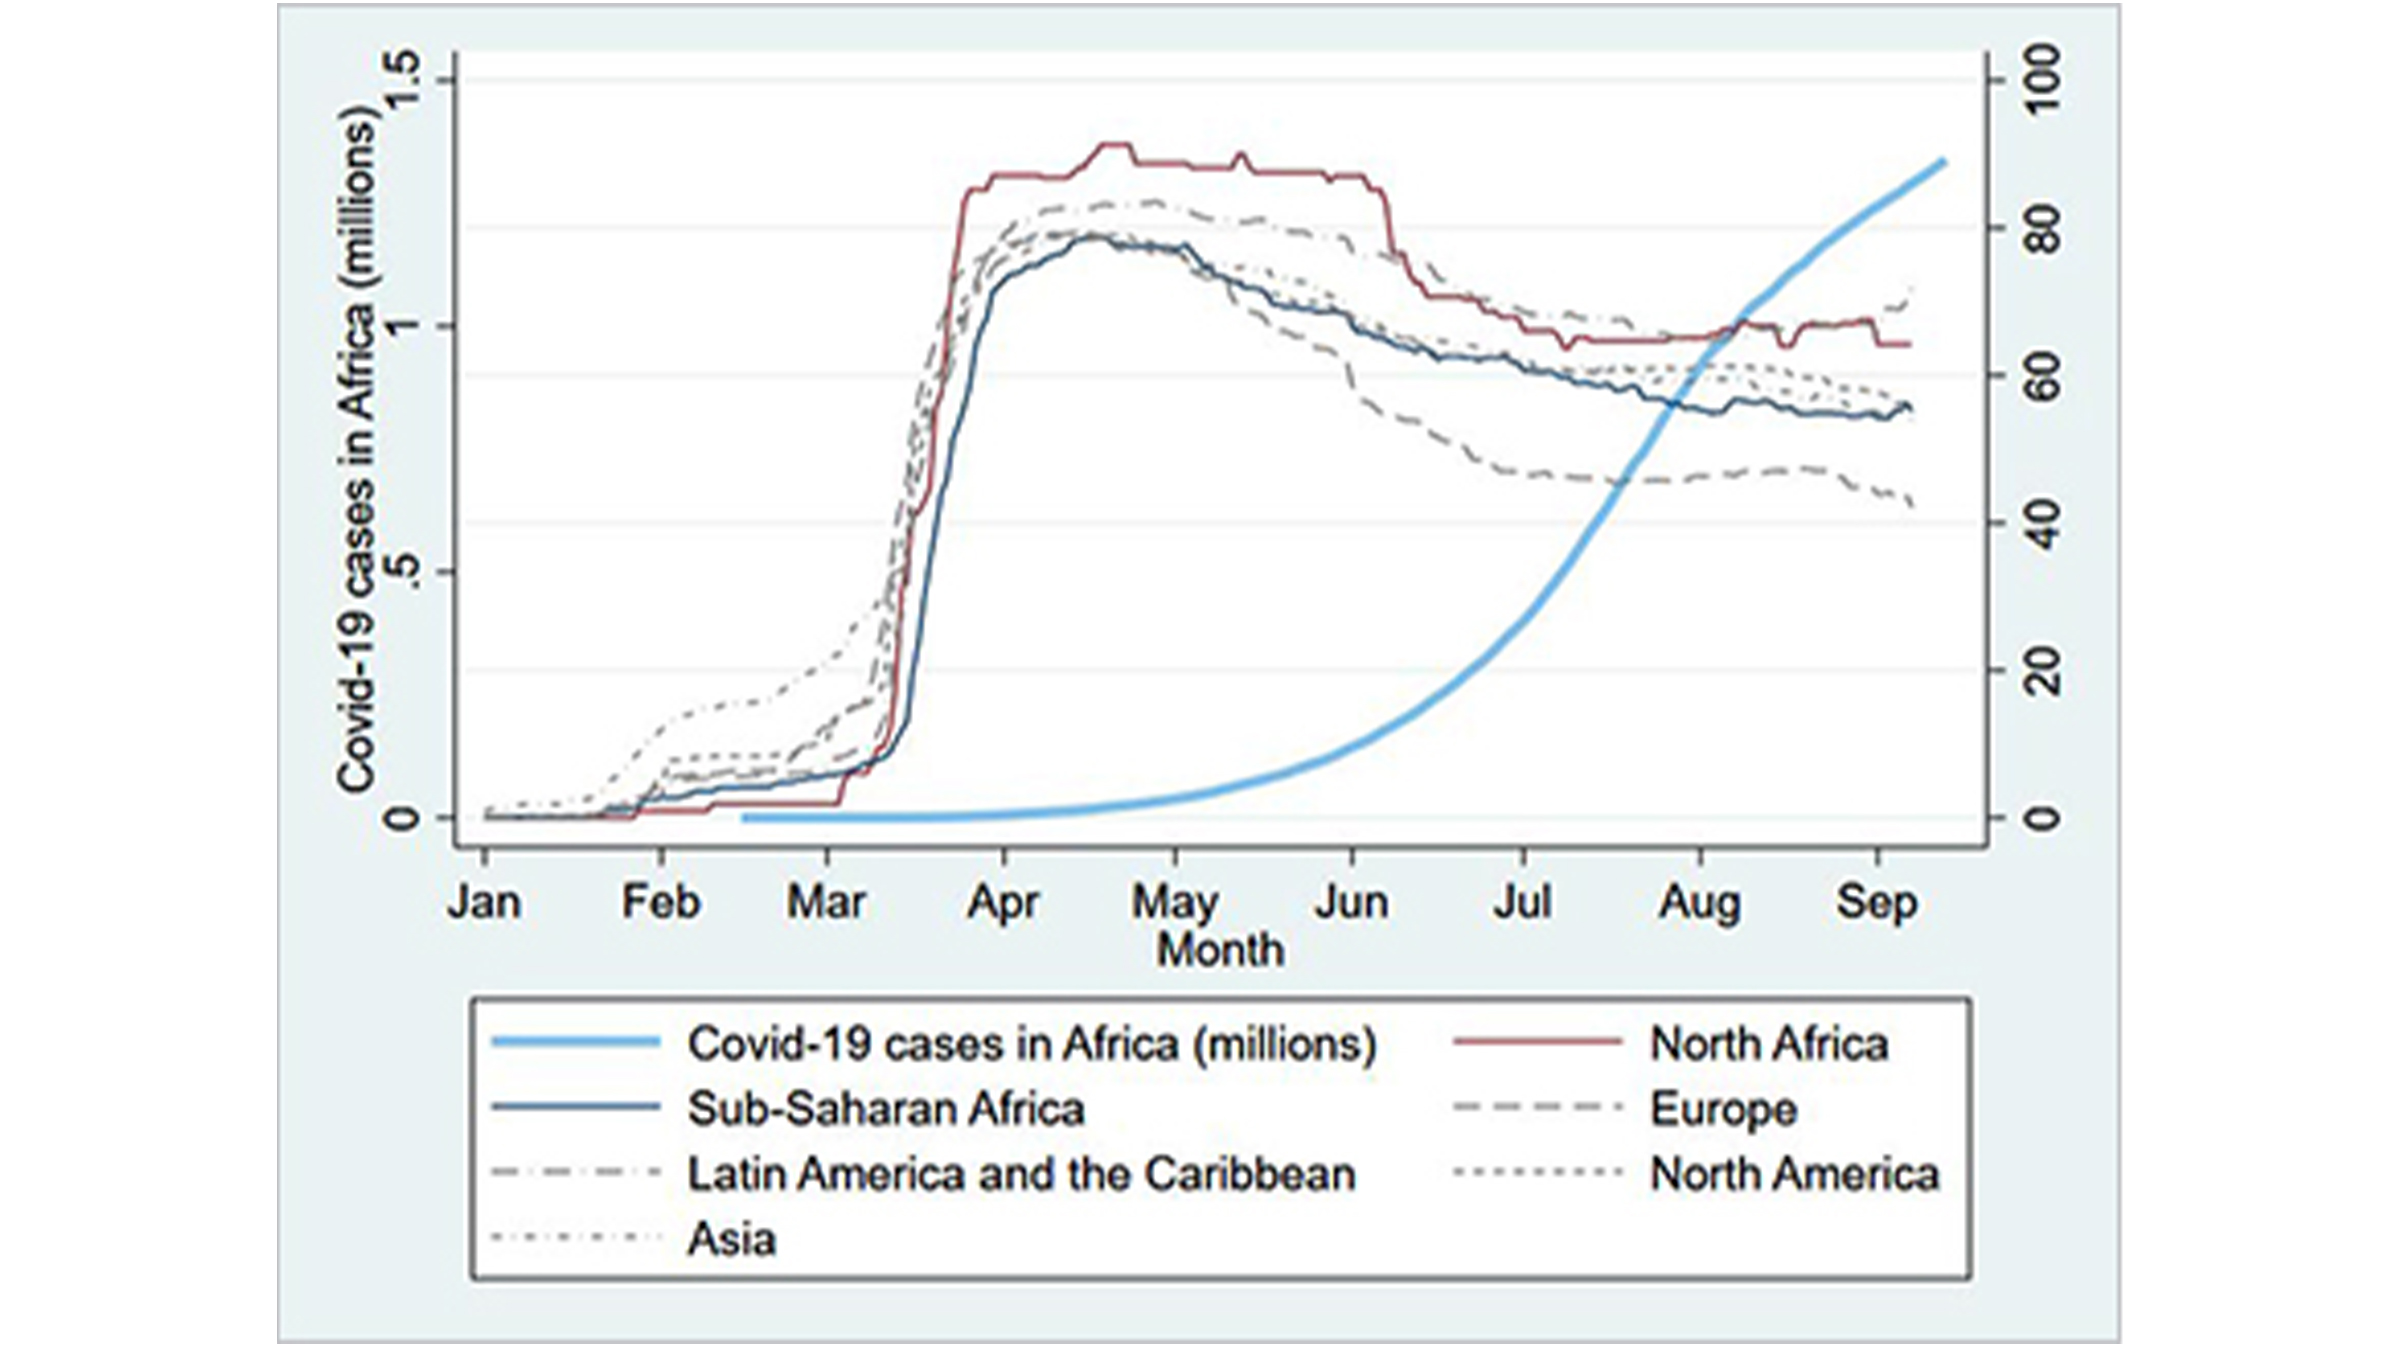 A graphic showing Covid-19 cases from January to September in Africa.